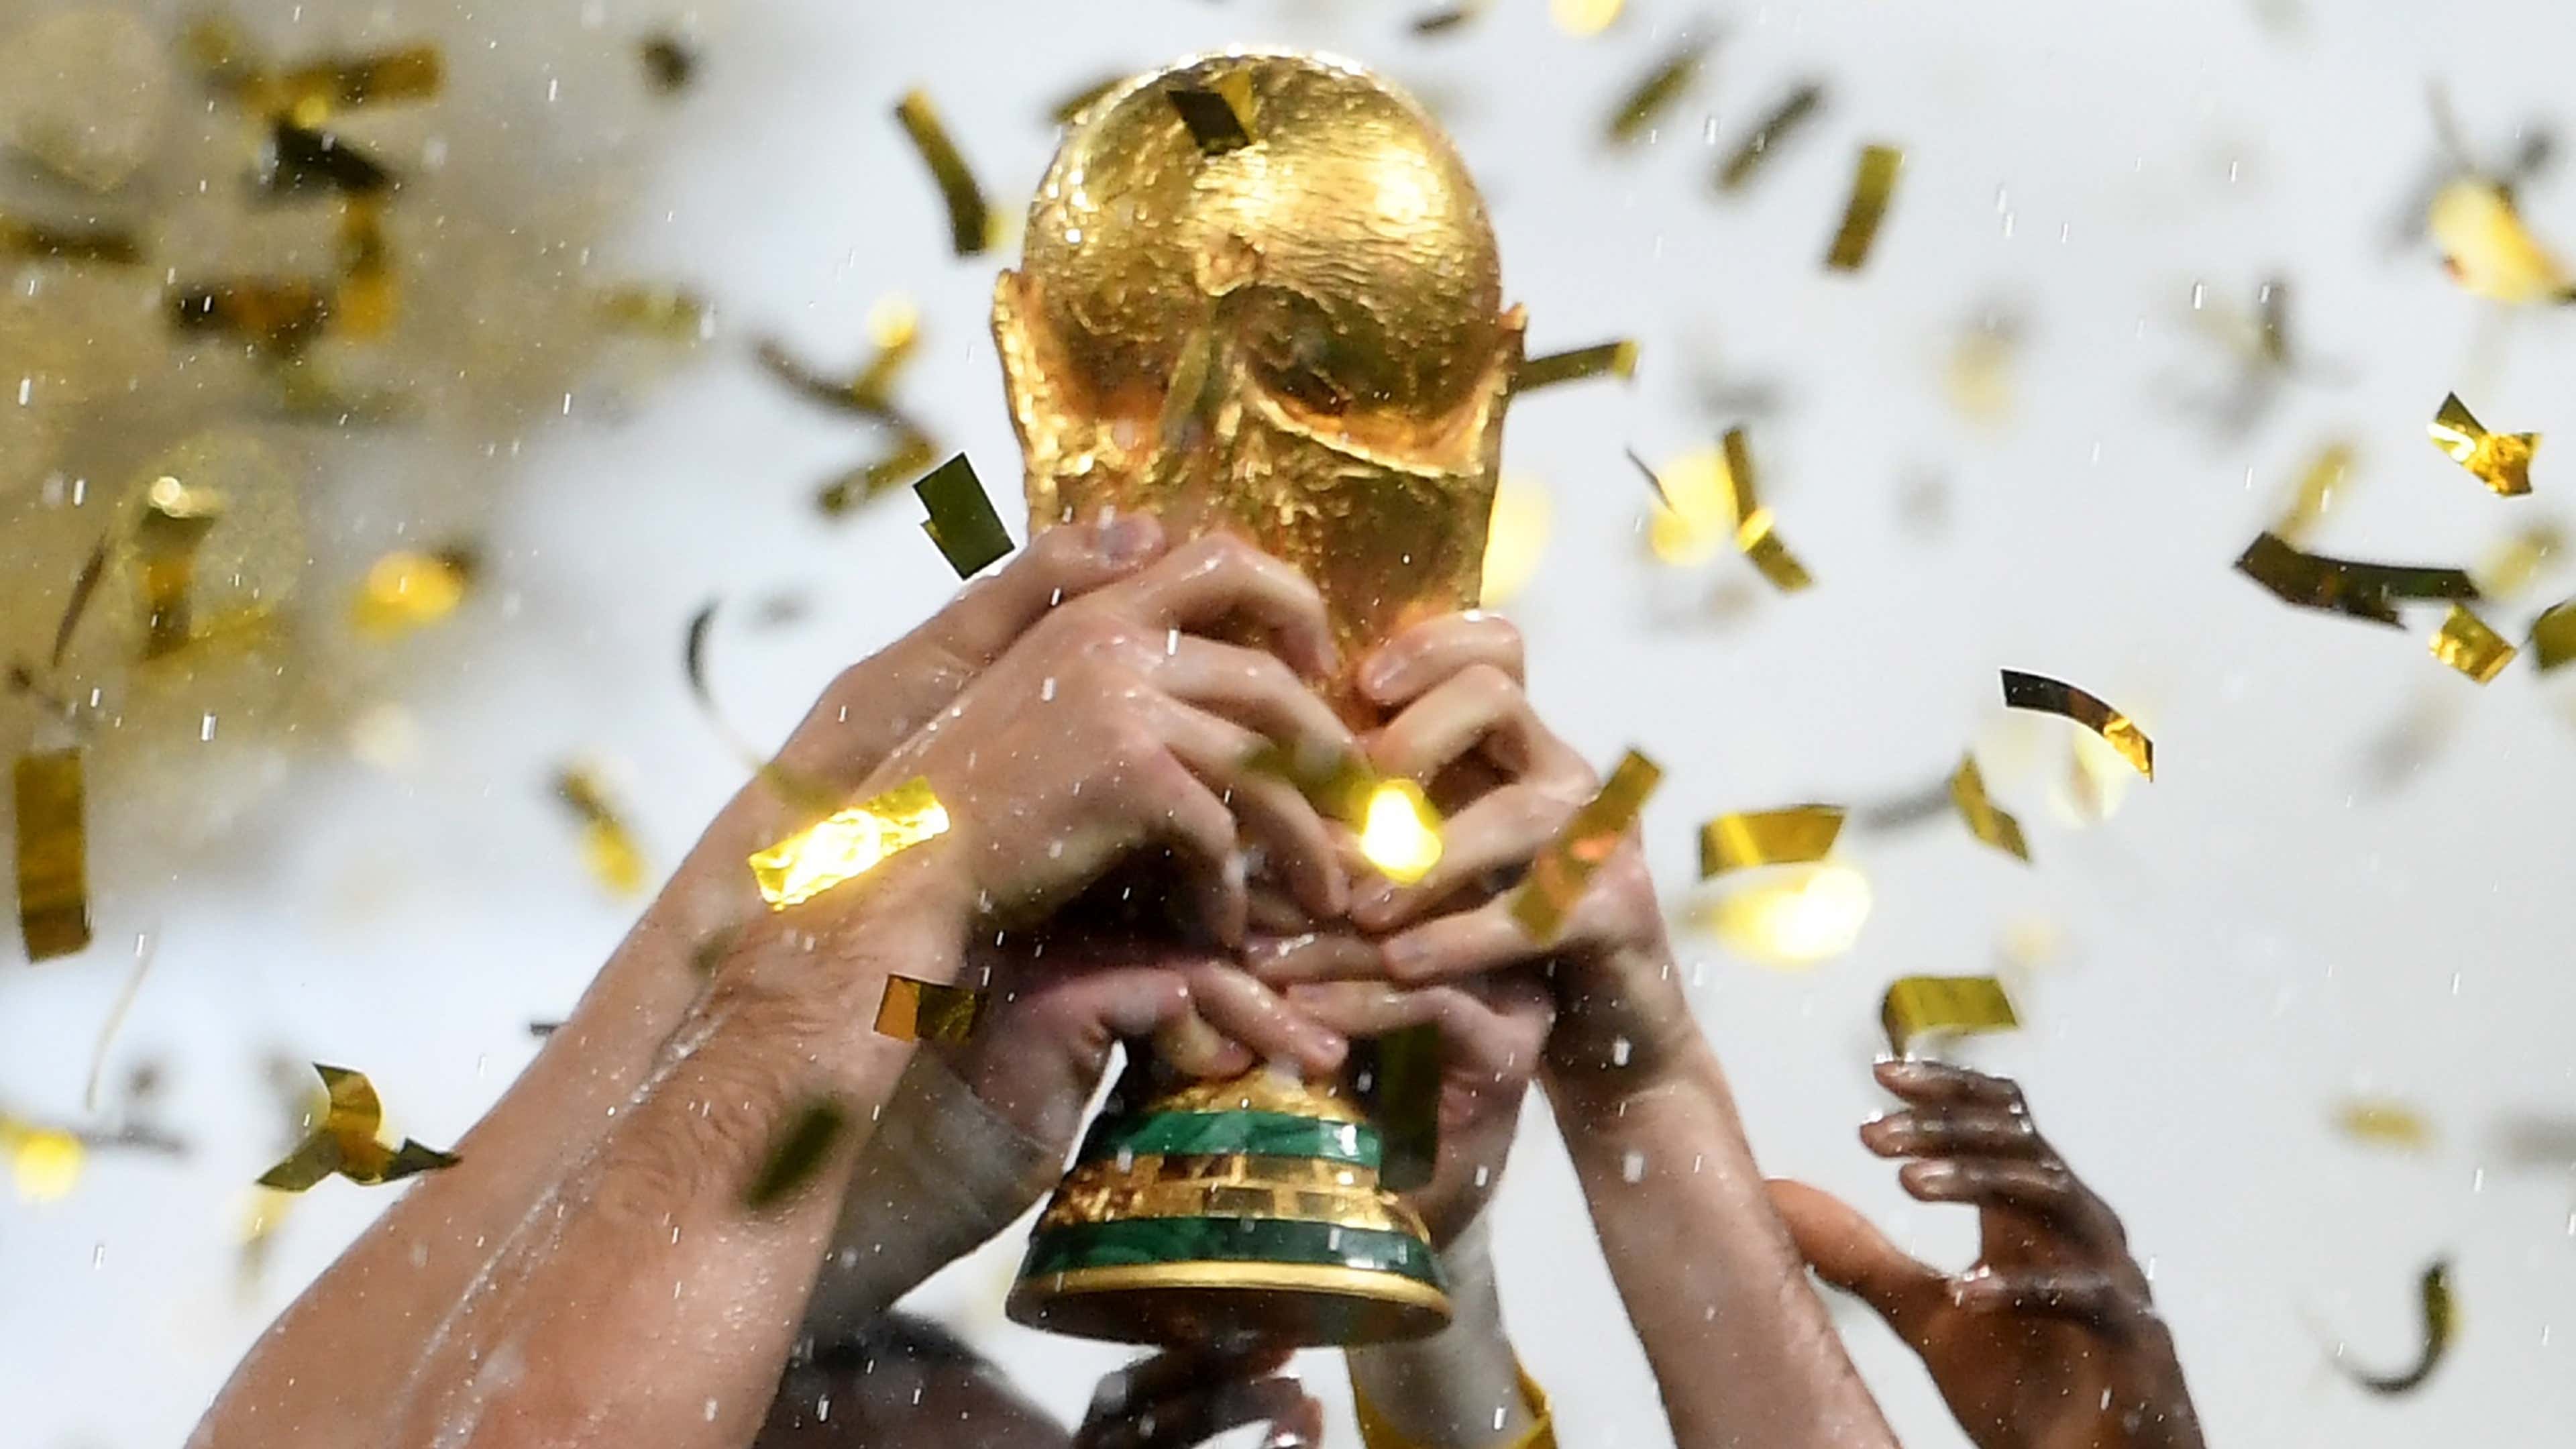 World Cup trophy: What it is made of, who made it & how much FIFA